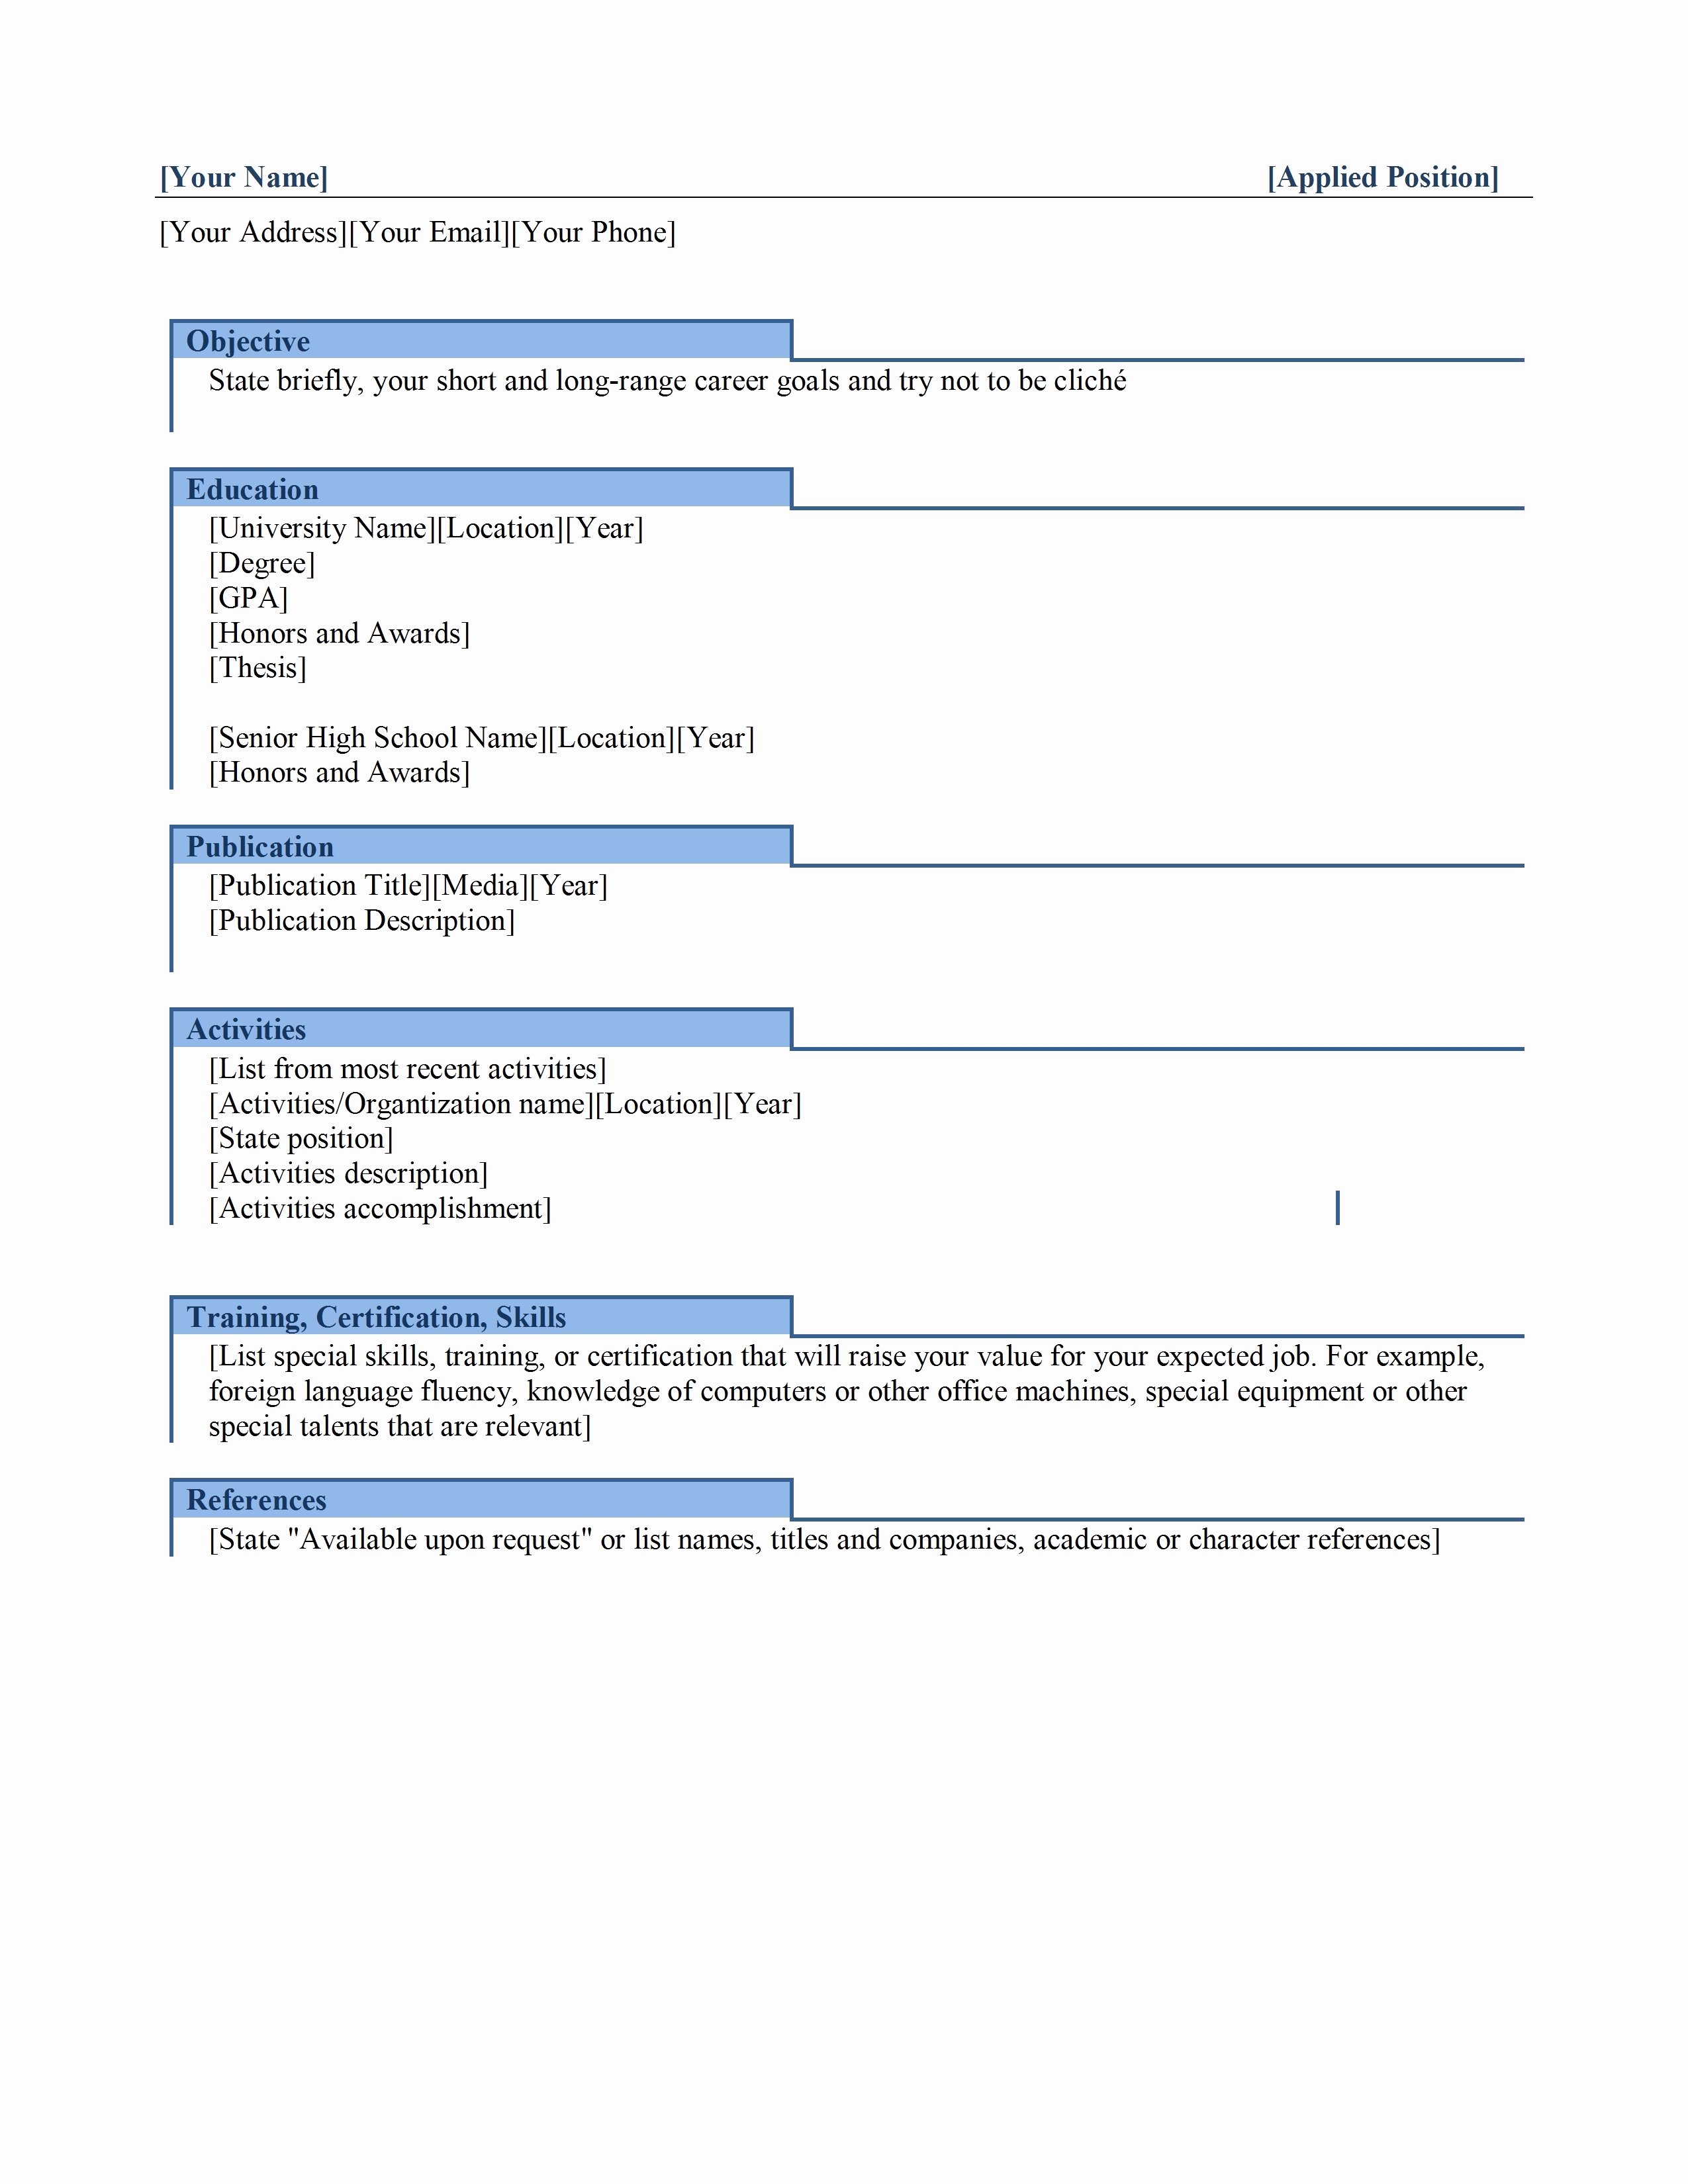 Resume format Free Download In Ms Word 2010 Resume Ideas